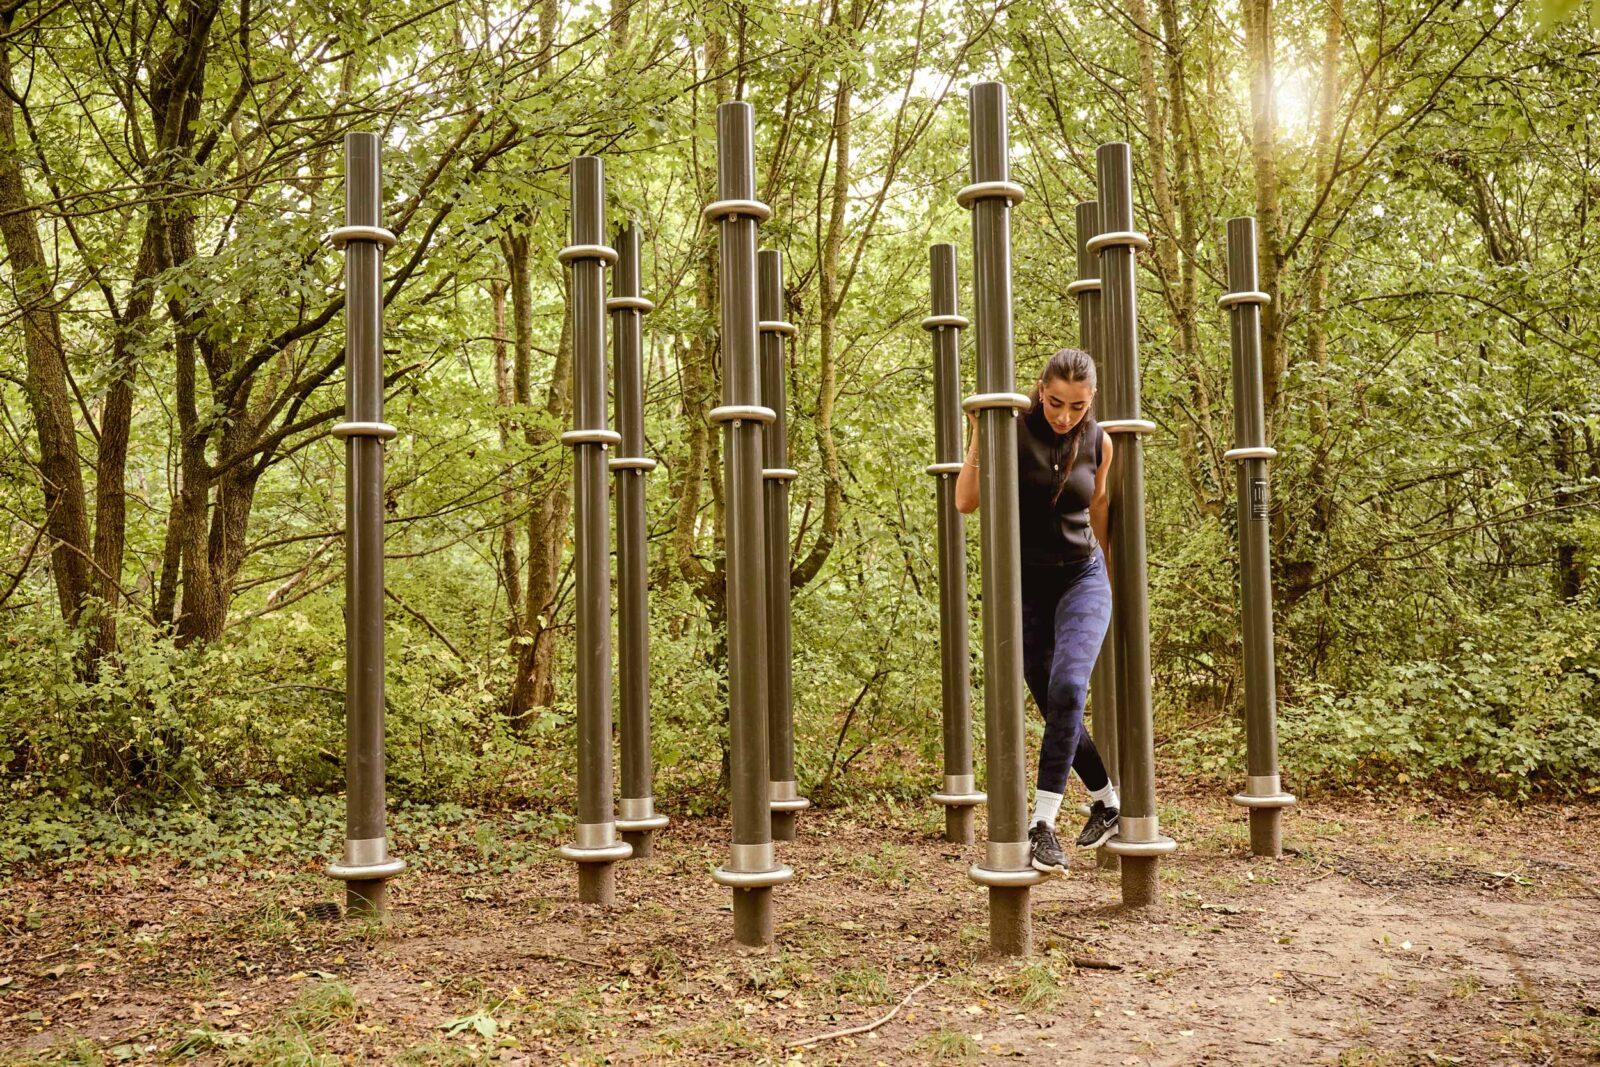 Jungle Walk - Challenging outdoor training equipment for OCR